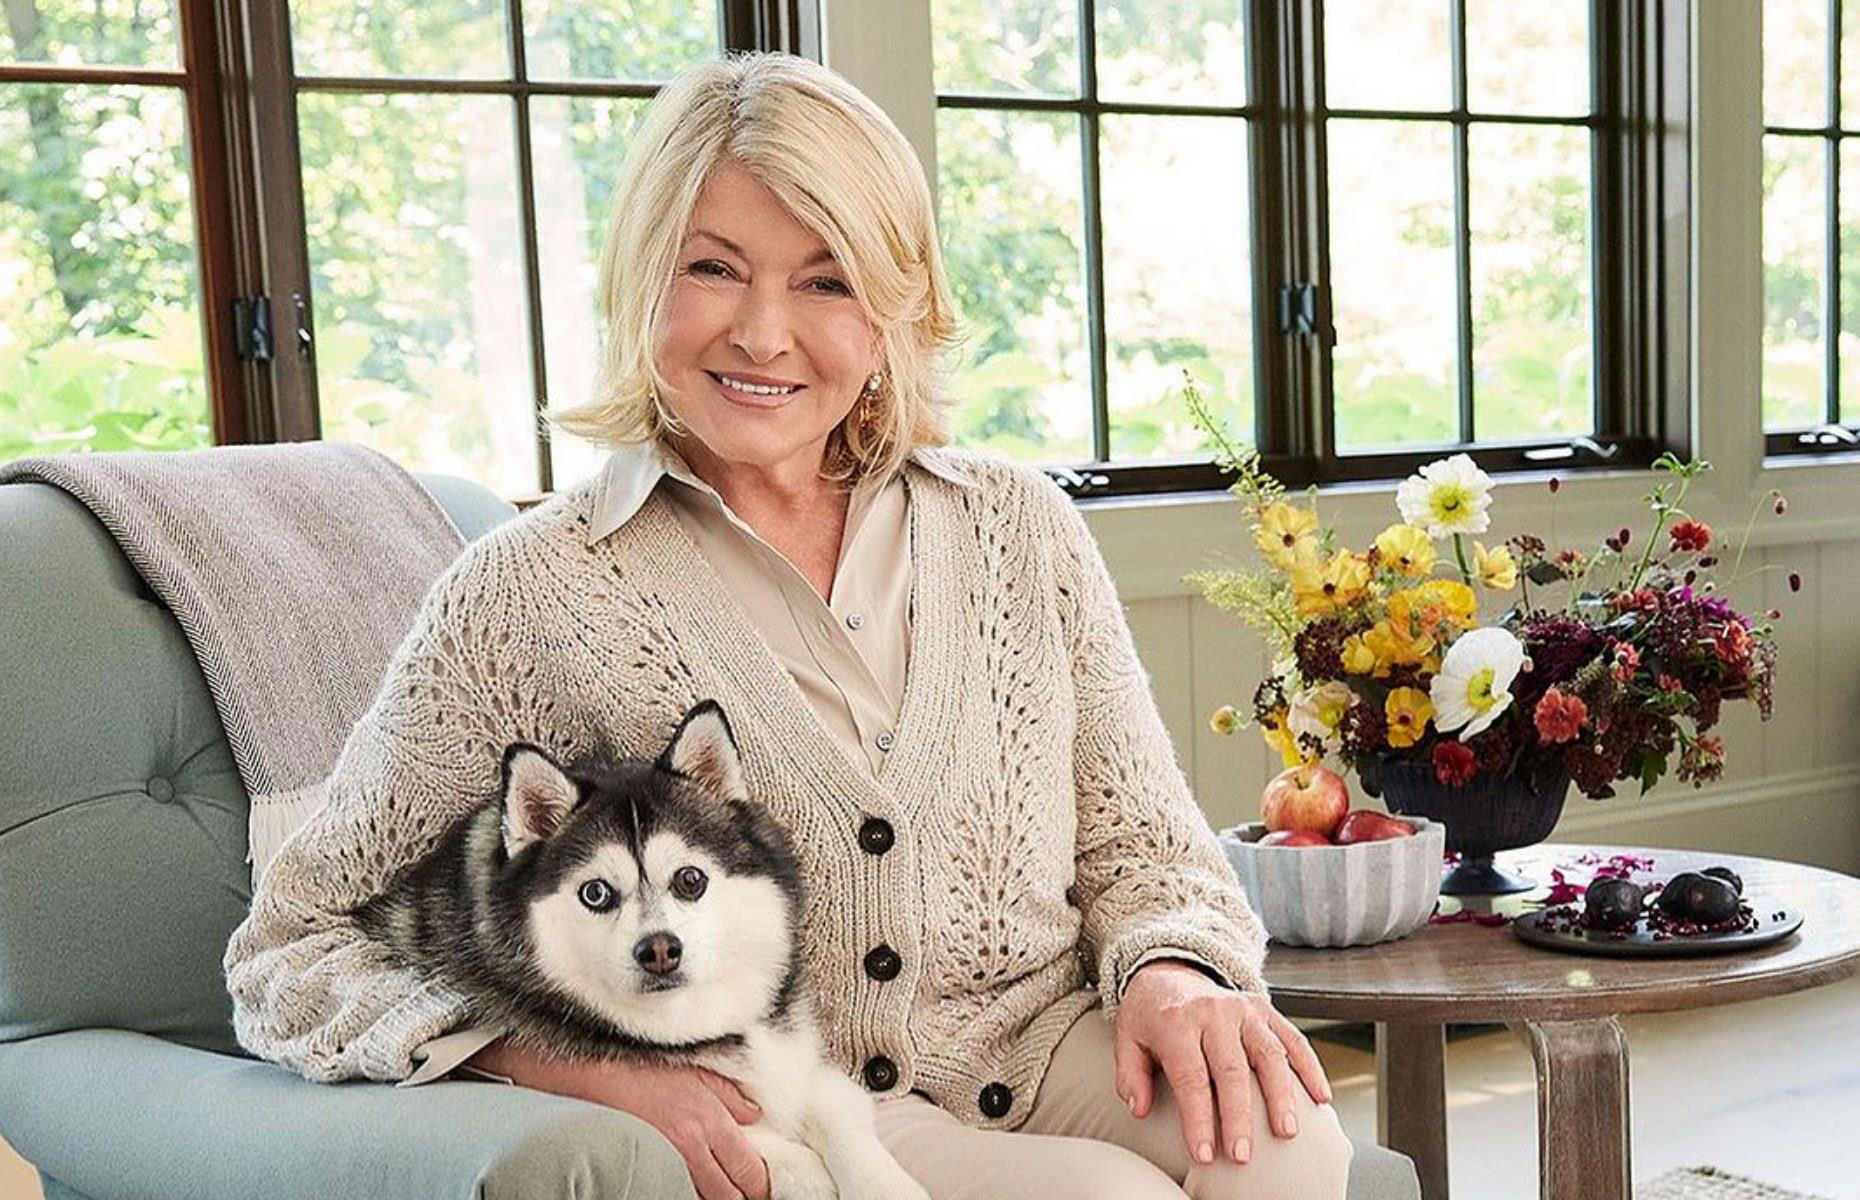 Make your home beautiful with Martha Stewart’s style secrets